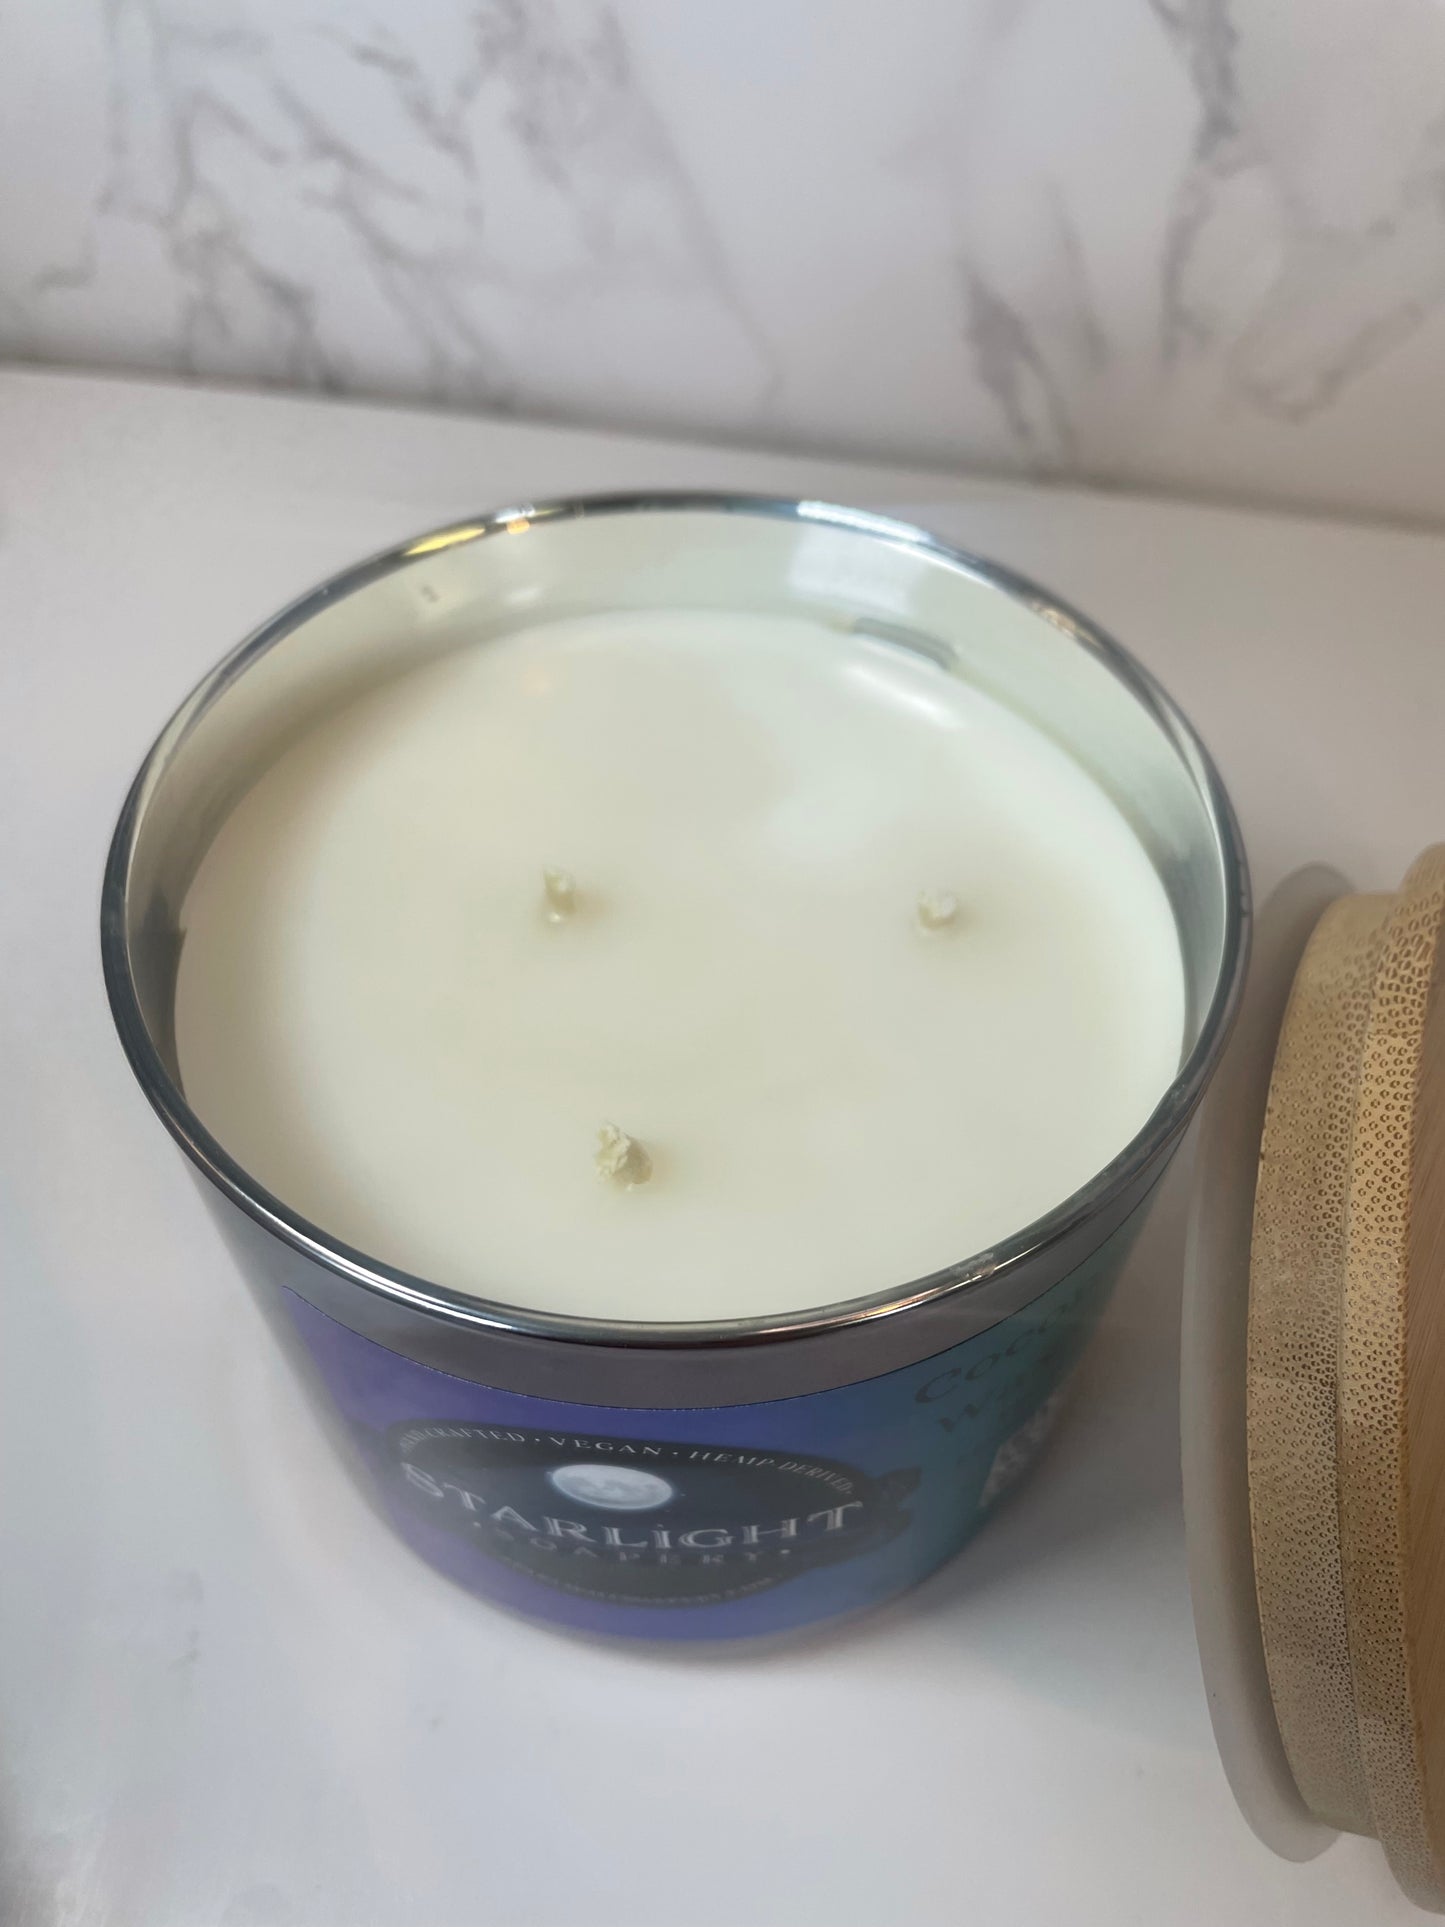 Before The Storm Large Soy Candle - Starlight Soapery 